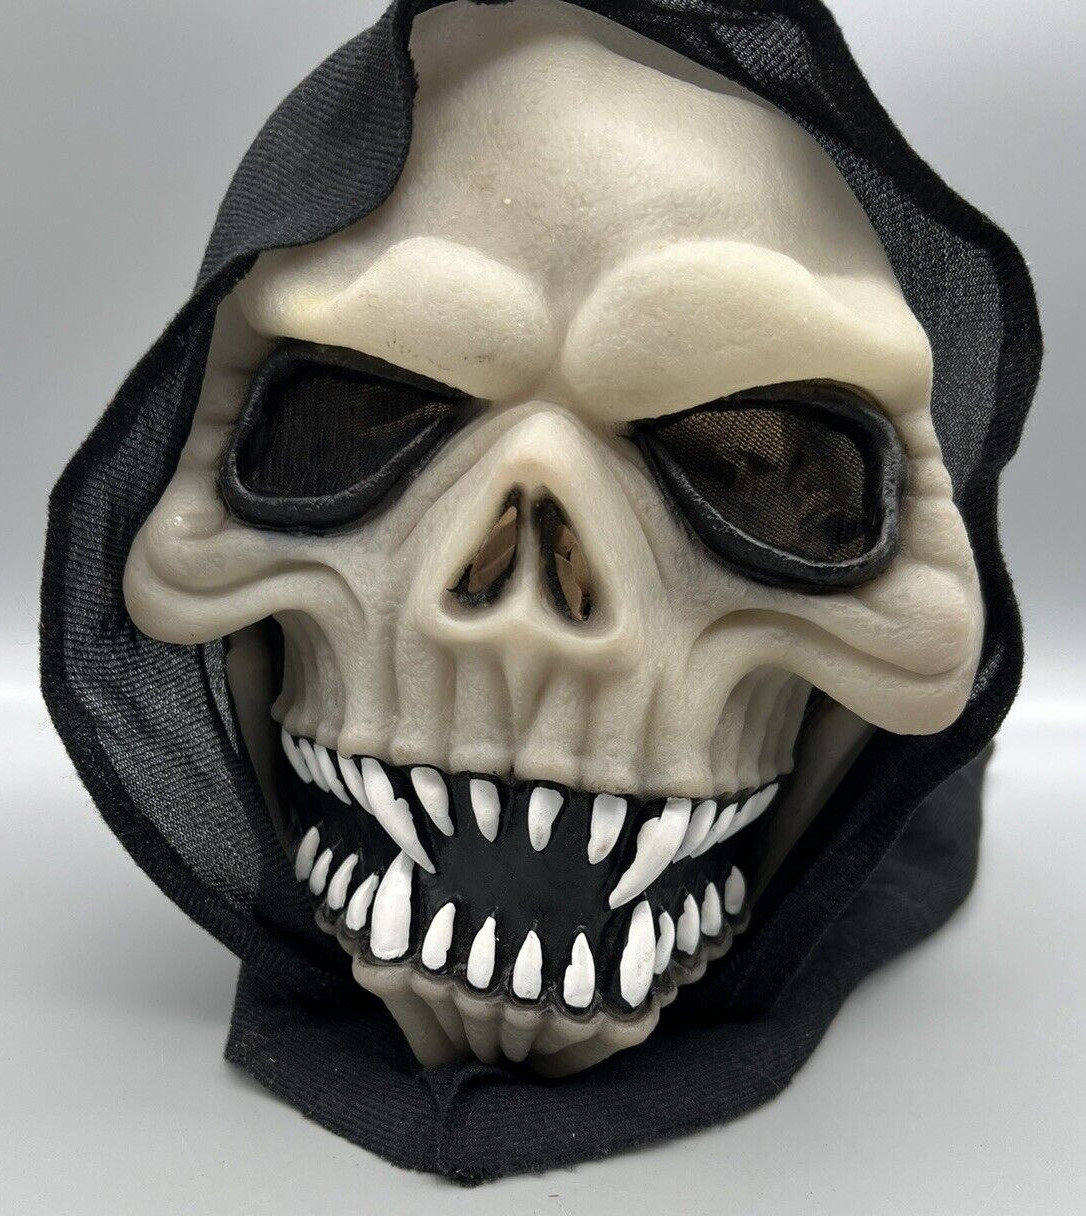 Skull Hooded Halloween Mask Glows In The Dark Adult Costume Scary